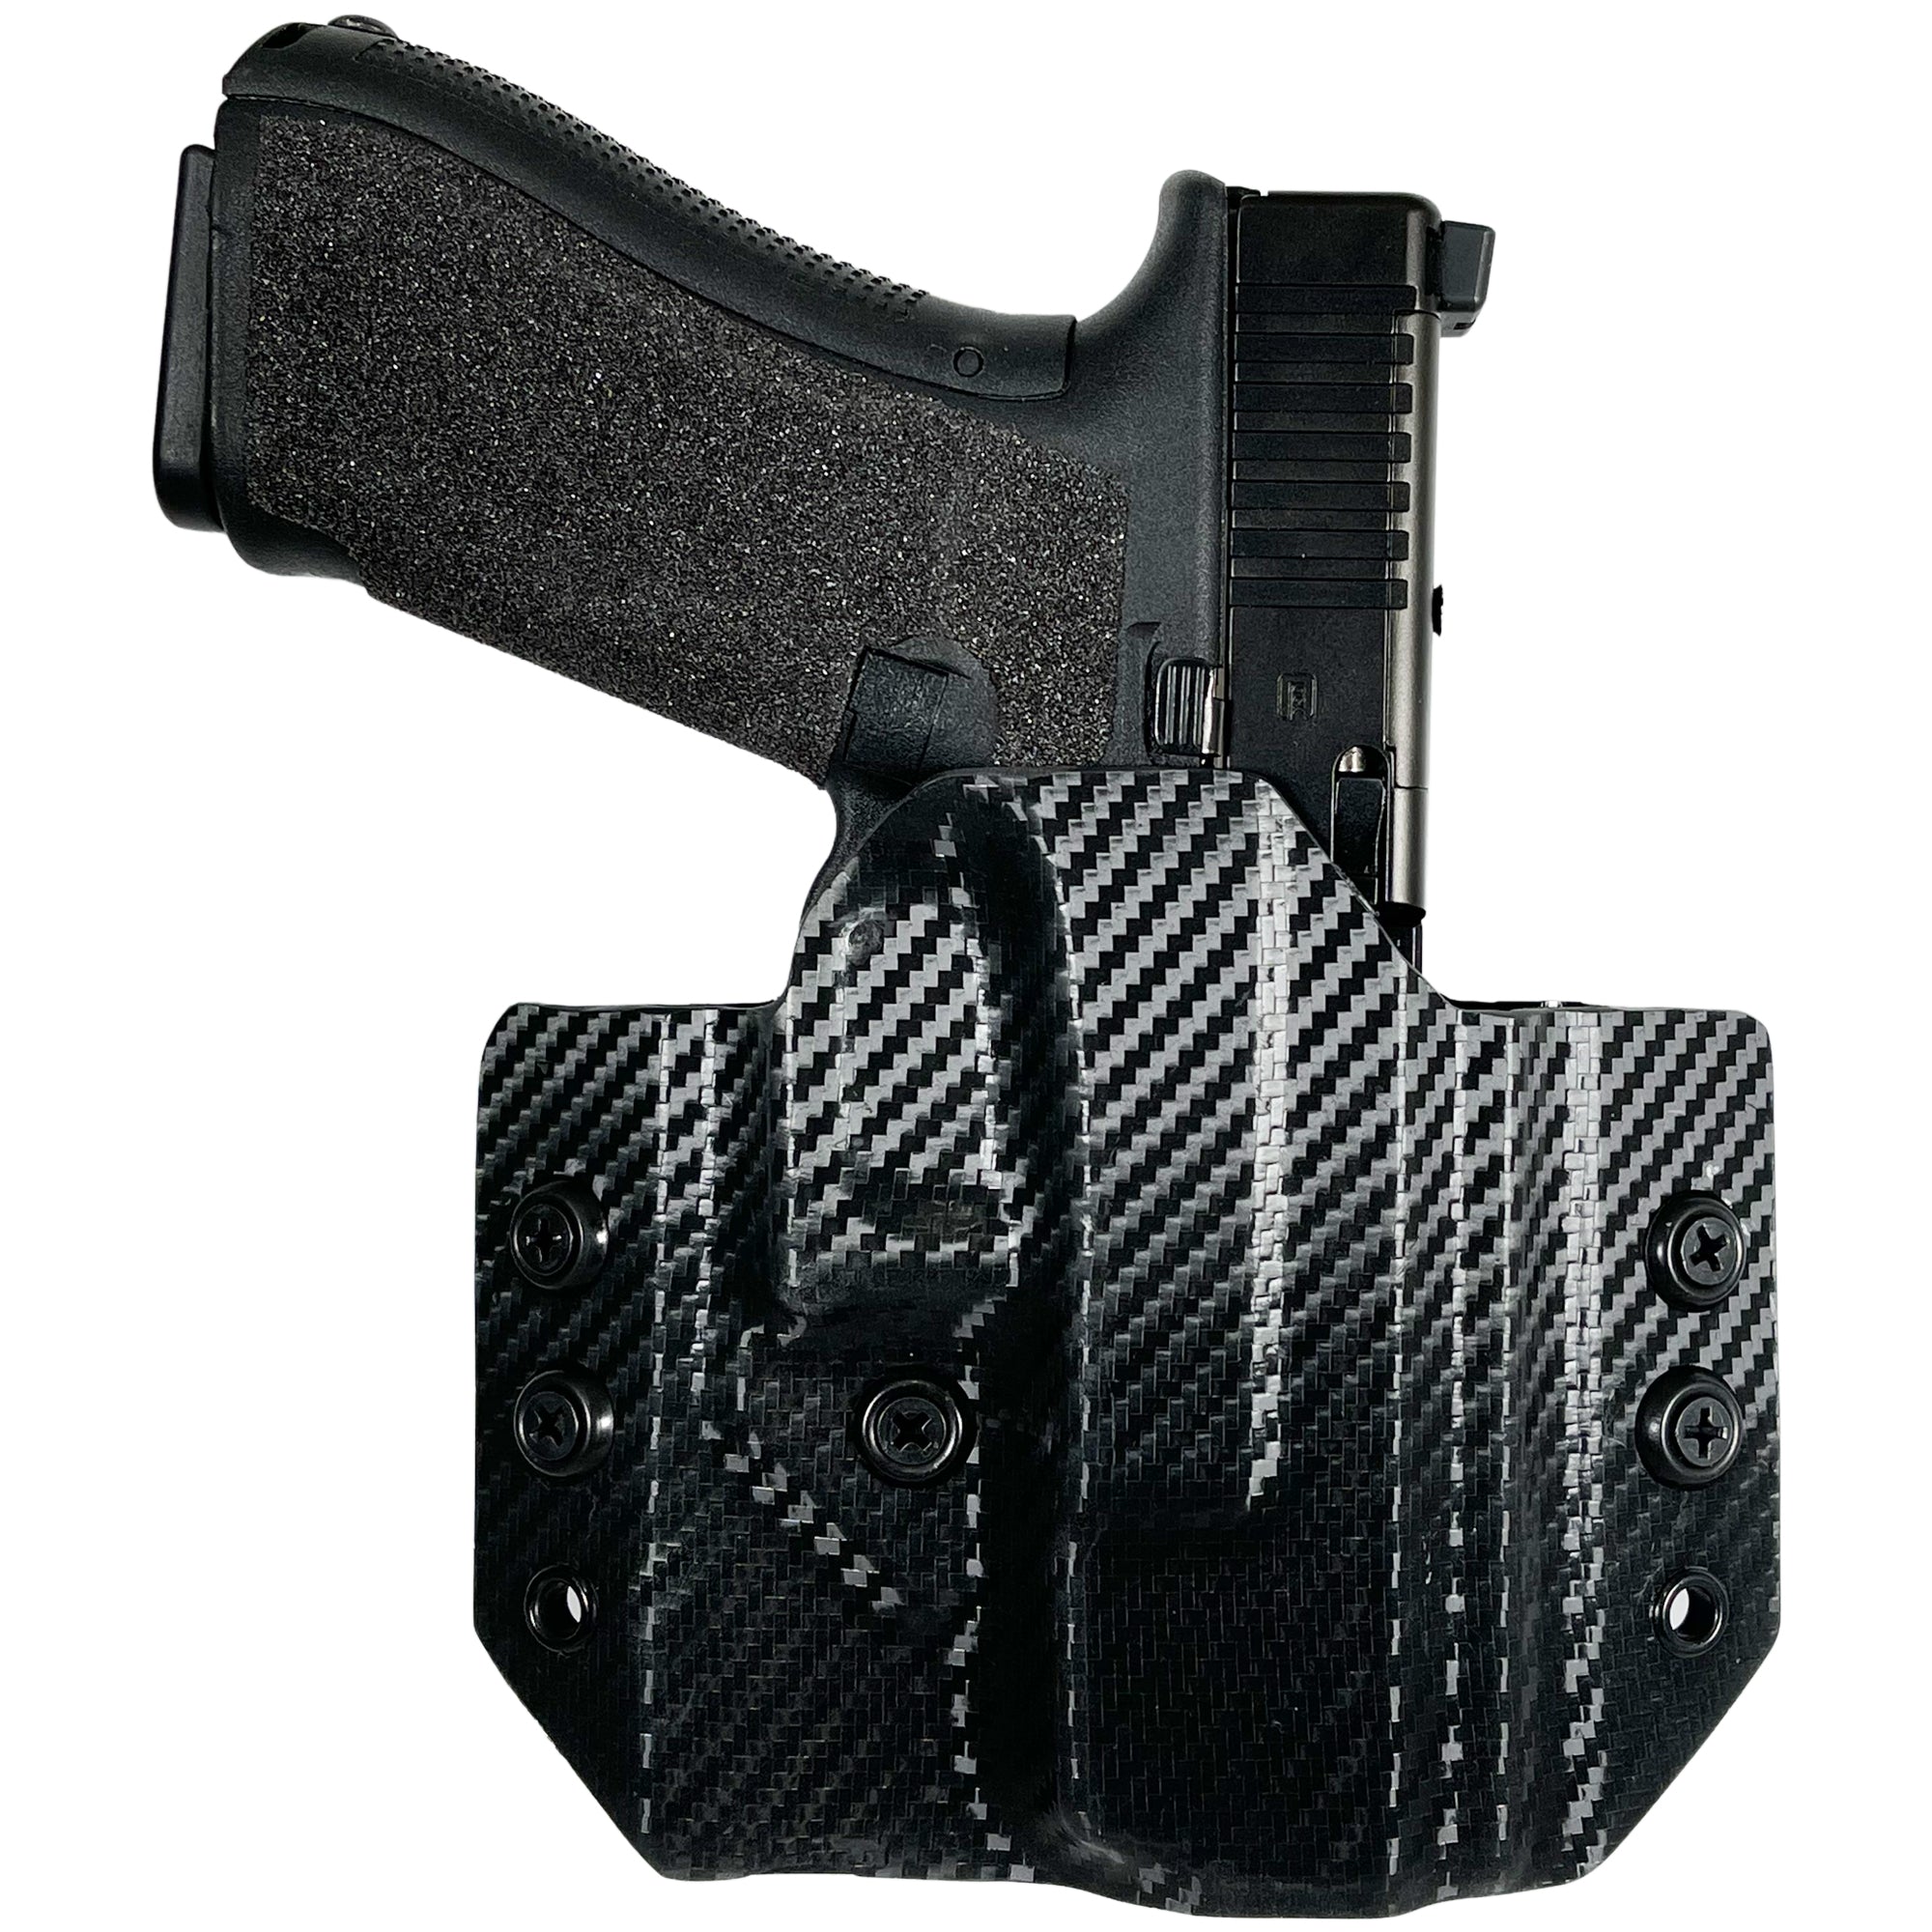 Glock 19, 19X, 23, 32 OWB Curved Holster